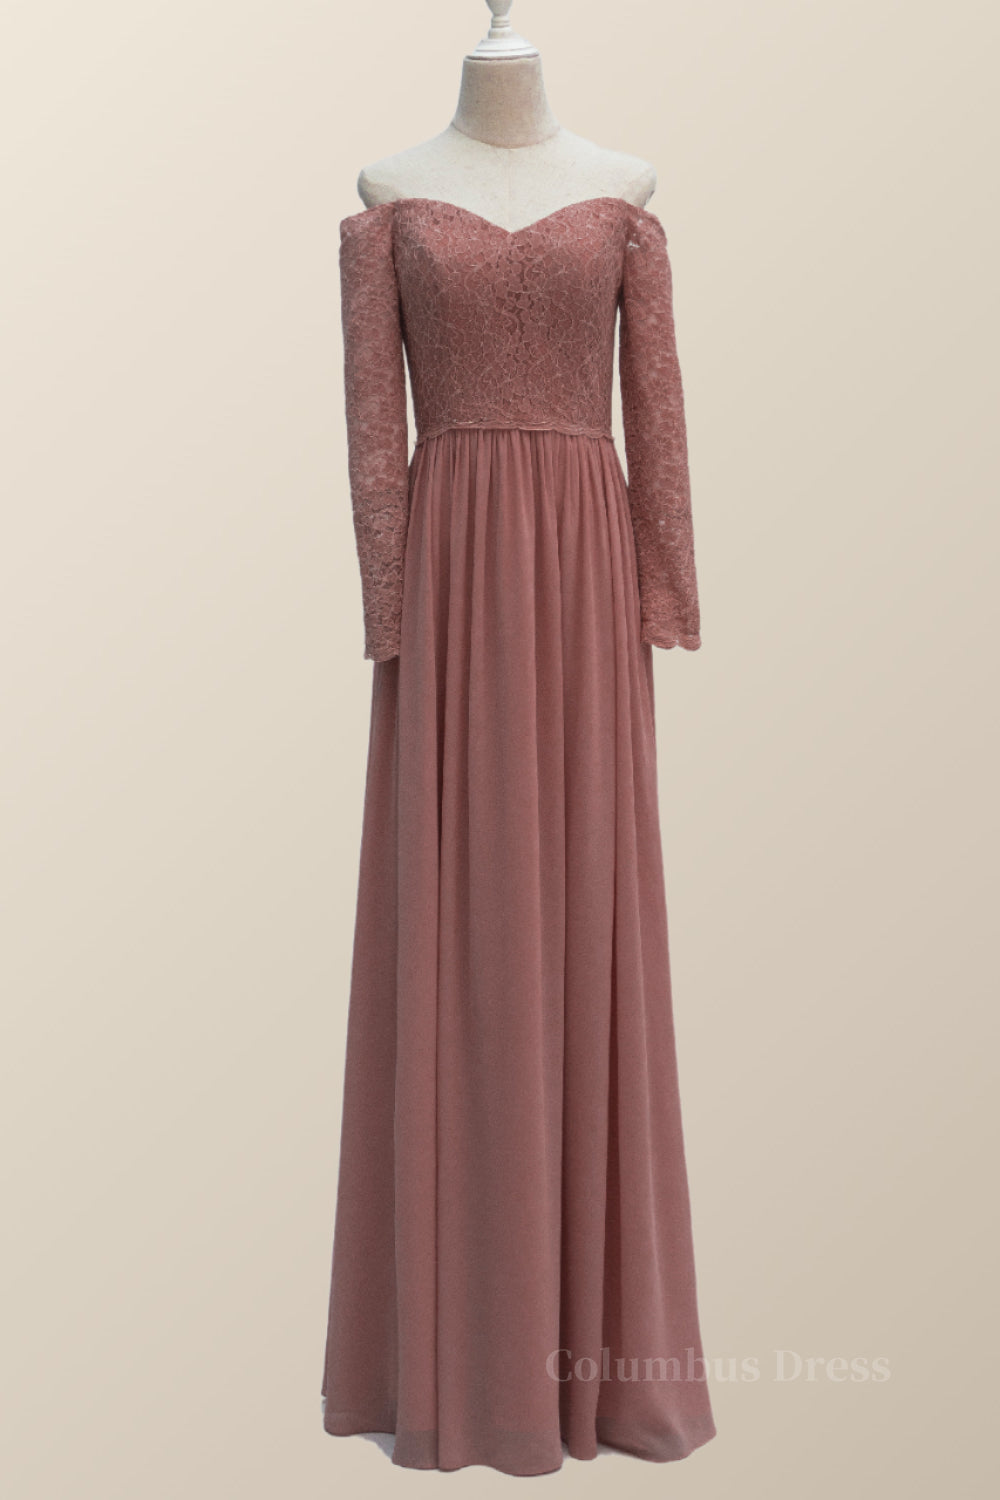 Dusty Rose Lace Long Sleeves Long Corset Bridesmaid Dress outfit, Party Dress Hijab